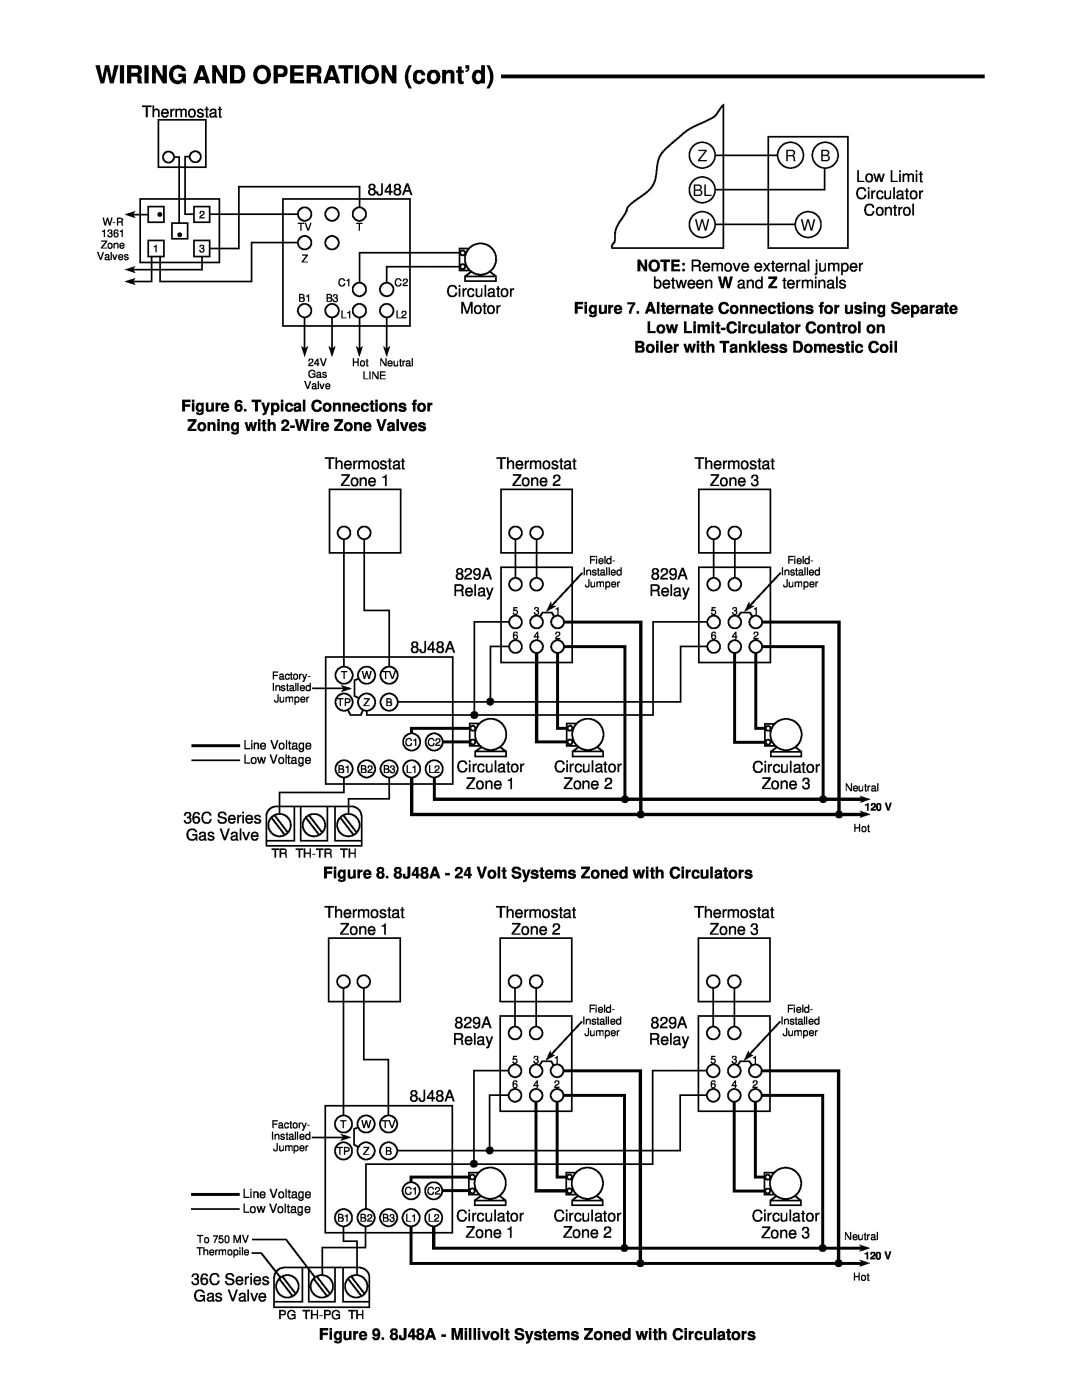 White Rodgers 8J48A WIRING AND OPERATION cont’d, Alternate Connections for using Separate, Low Limit-Circulator Control on 